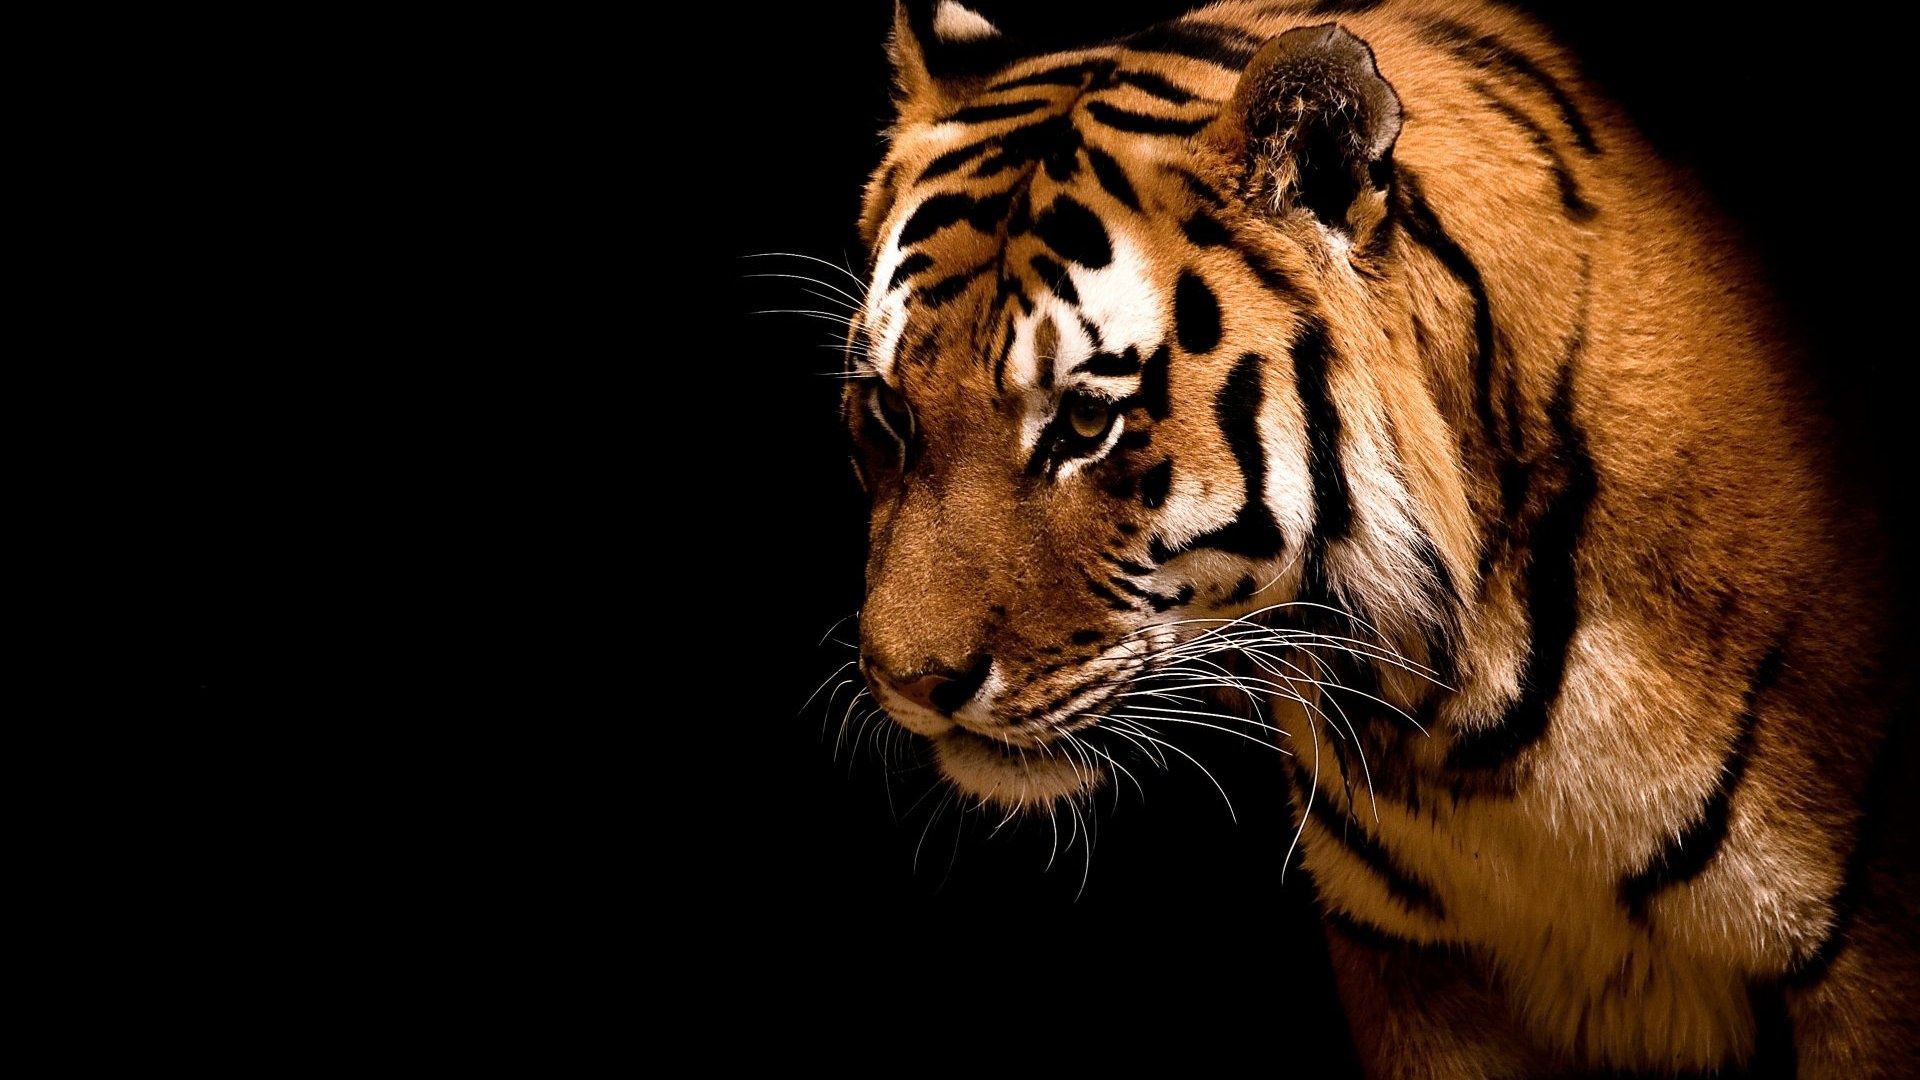 1064 Tiger HD Wallpapers | Backgrounds - Wallpaper Abyss